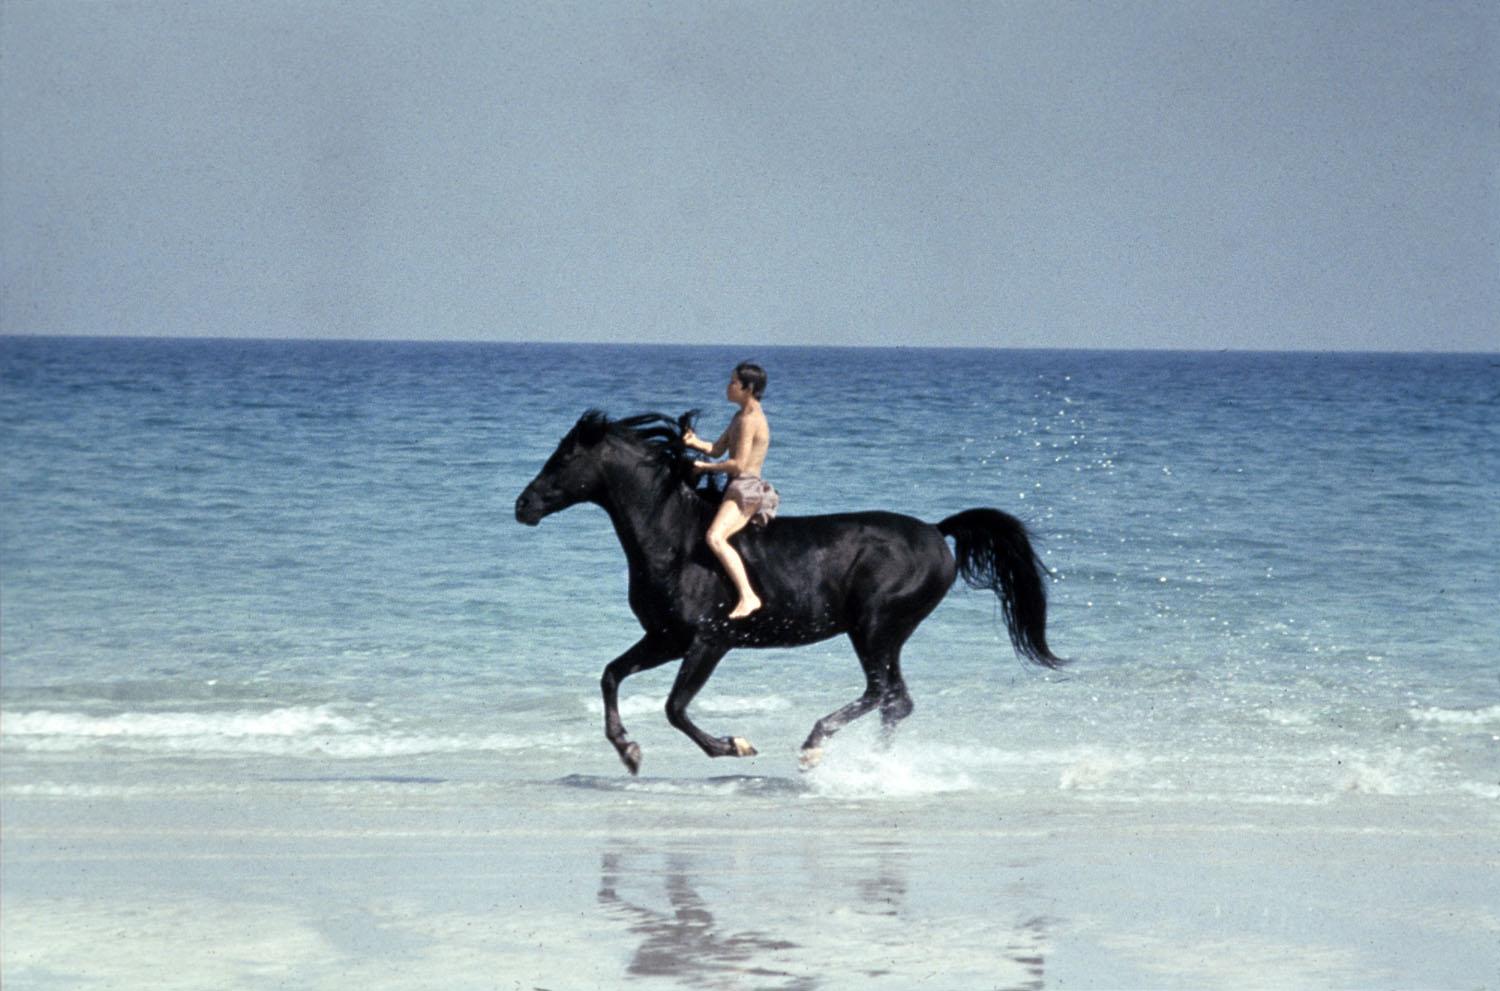 Black stallion - (#69366) - High Quality and Resolution Wallpapers ...